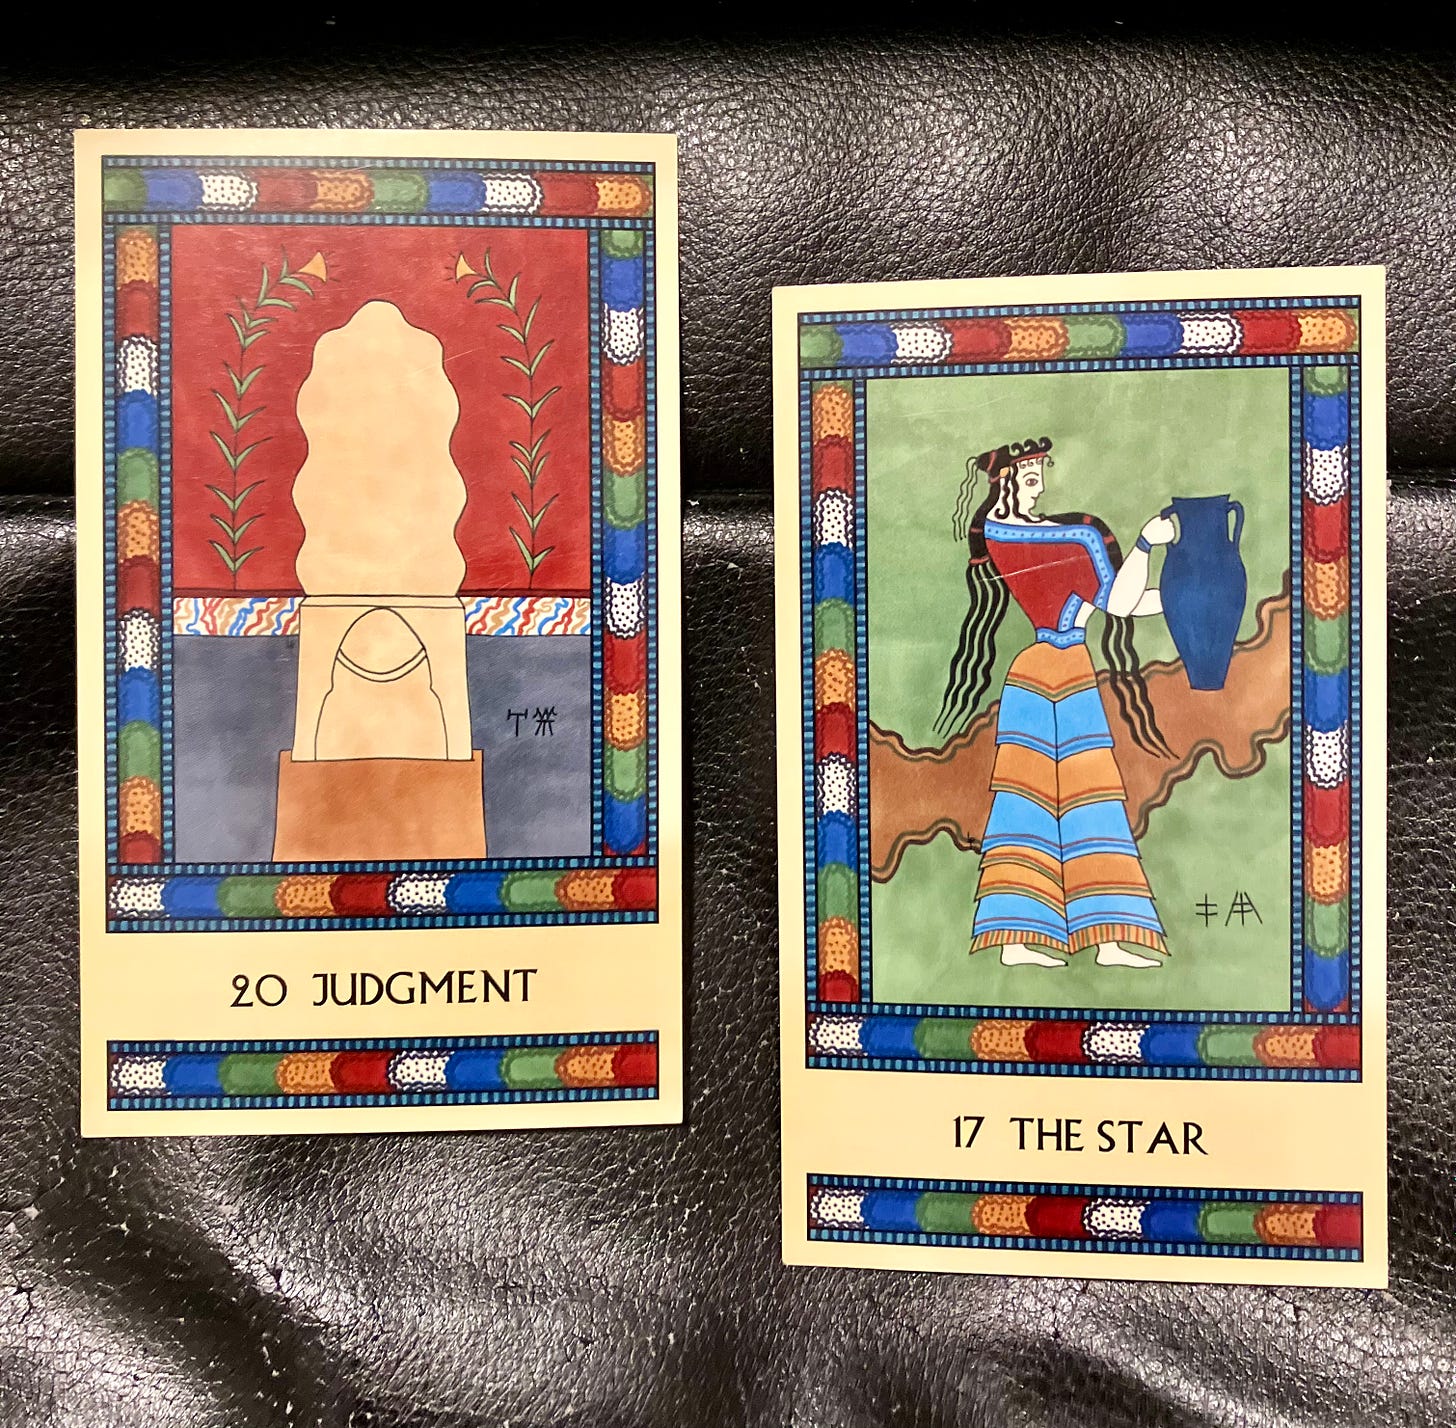 Two Minoan Tarot cards on a shiny black background. Both cards have multicolor borders. Judgment shows the central seat in the Knossos Throne Room, with wall frescoes surrounding it. The Star shows a Minoan woman, facing right, holding a large blue vase. 